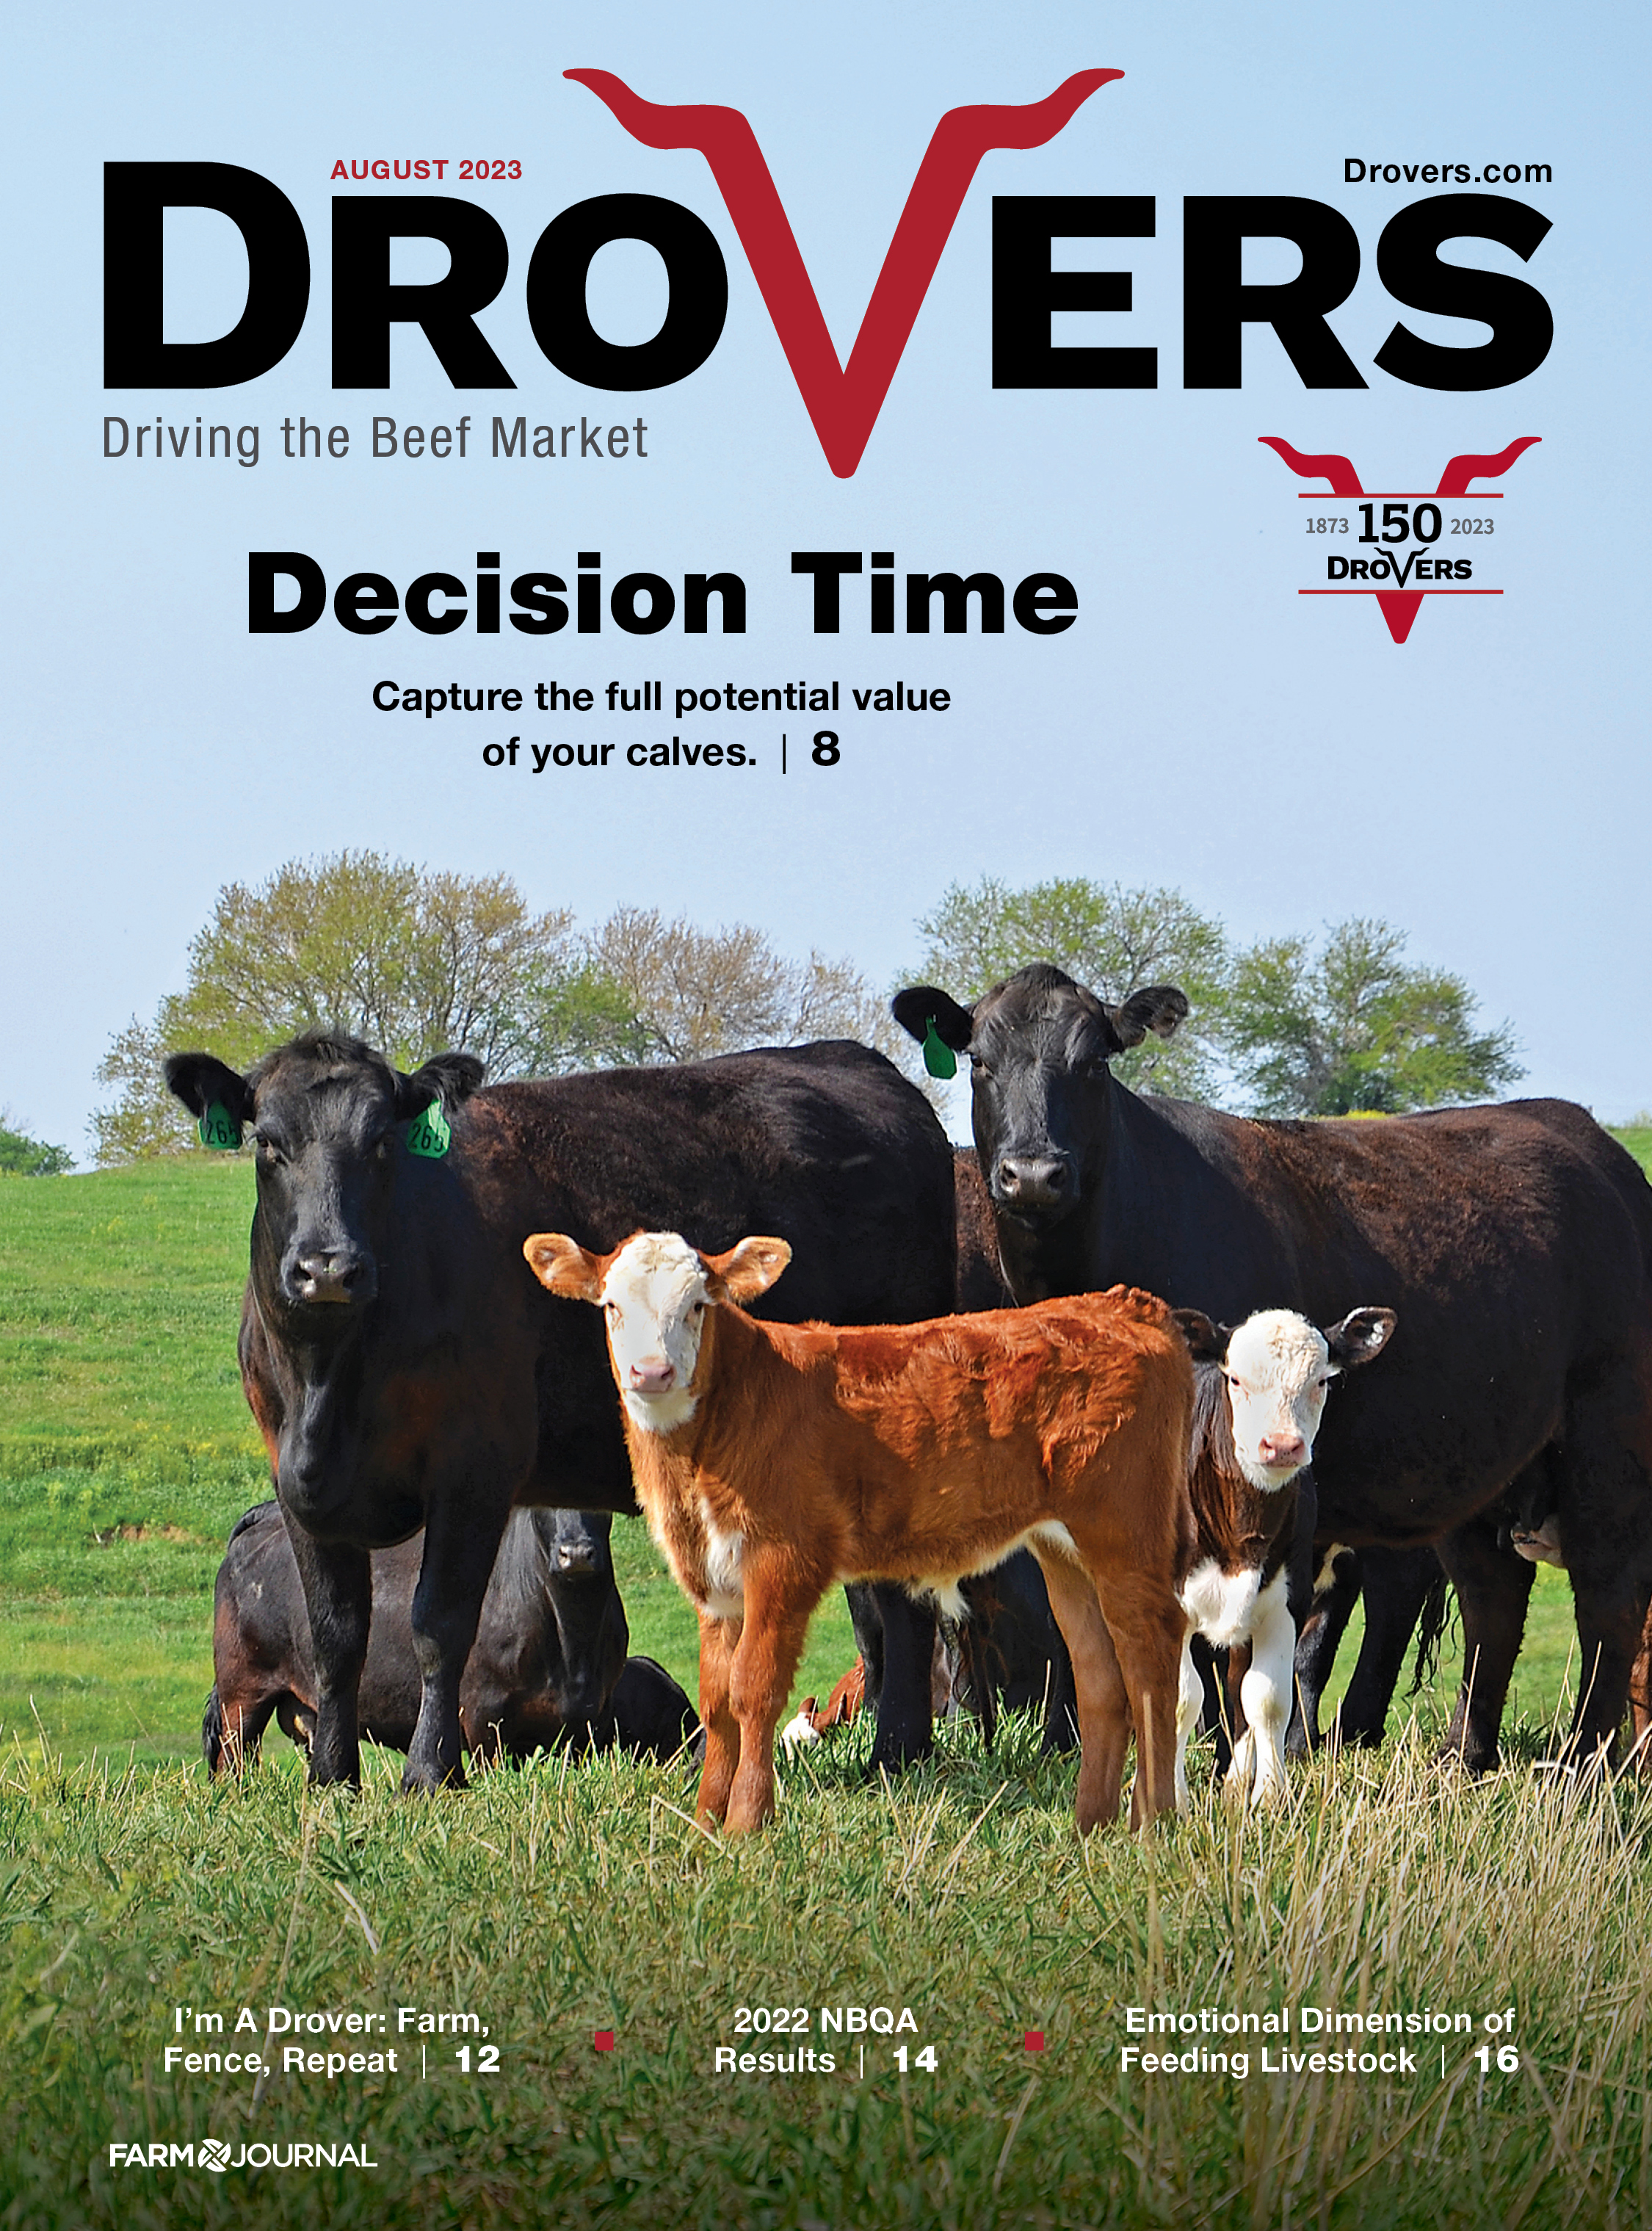  Drovers - August 2023 